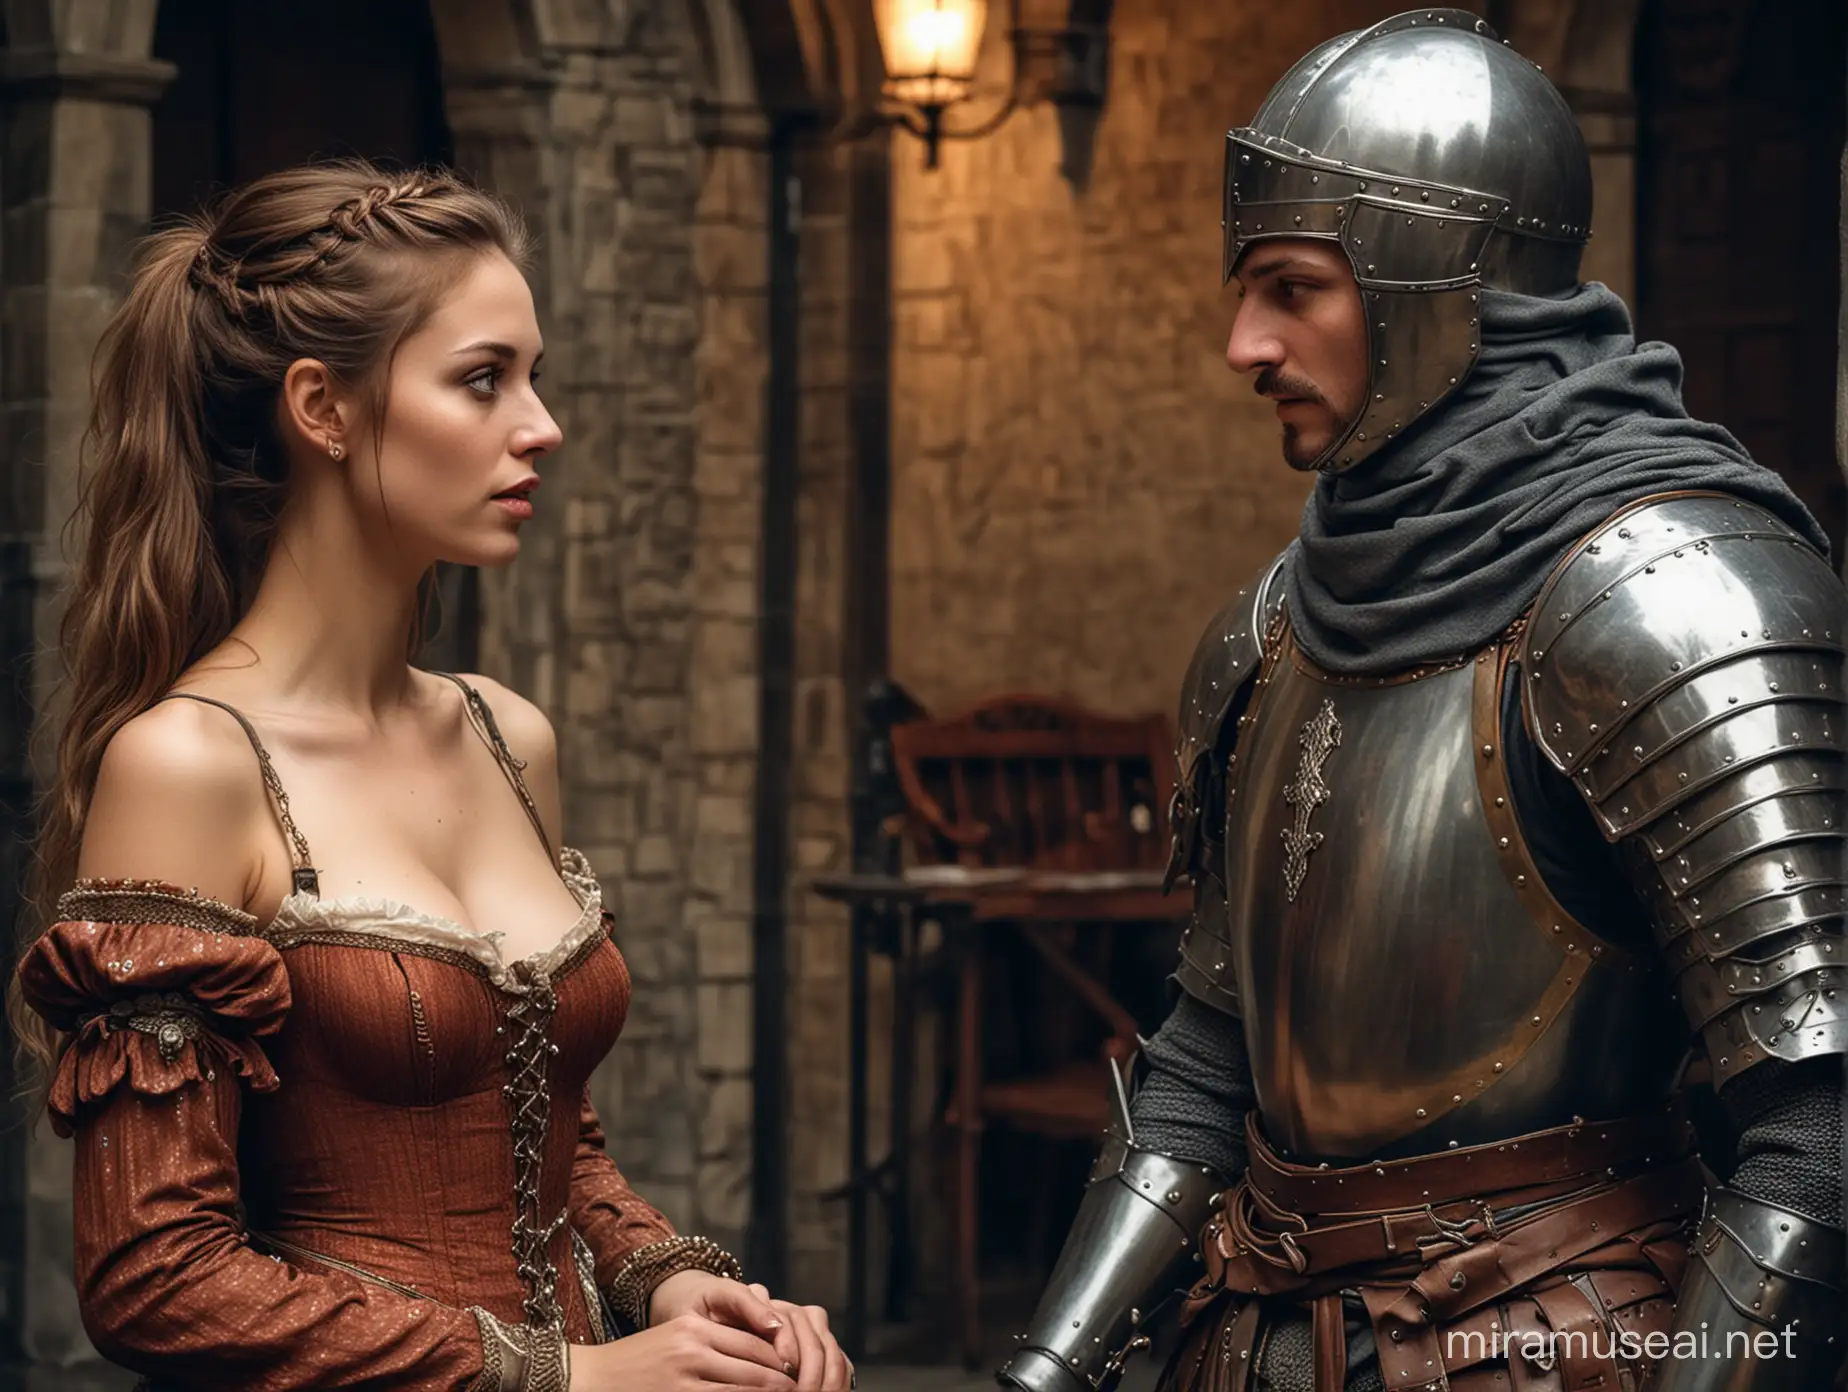 Fascinating Merchant A Conversation Between a Prostitute and a Knight